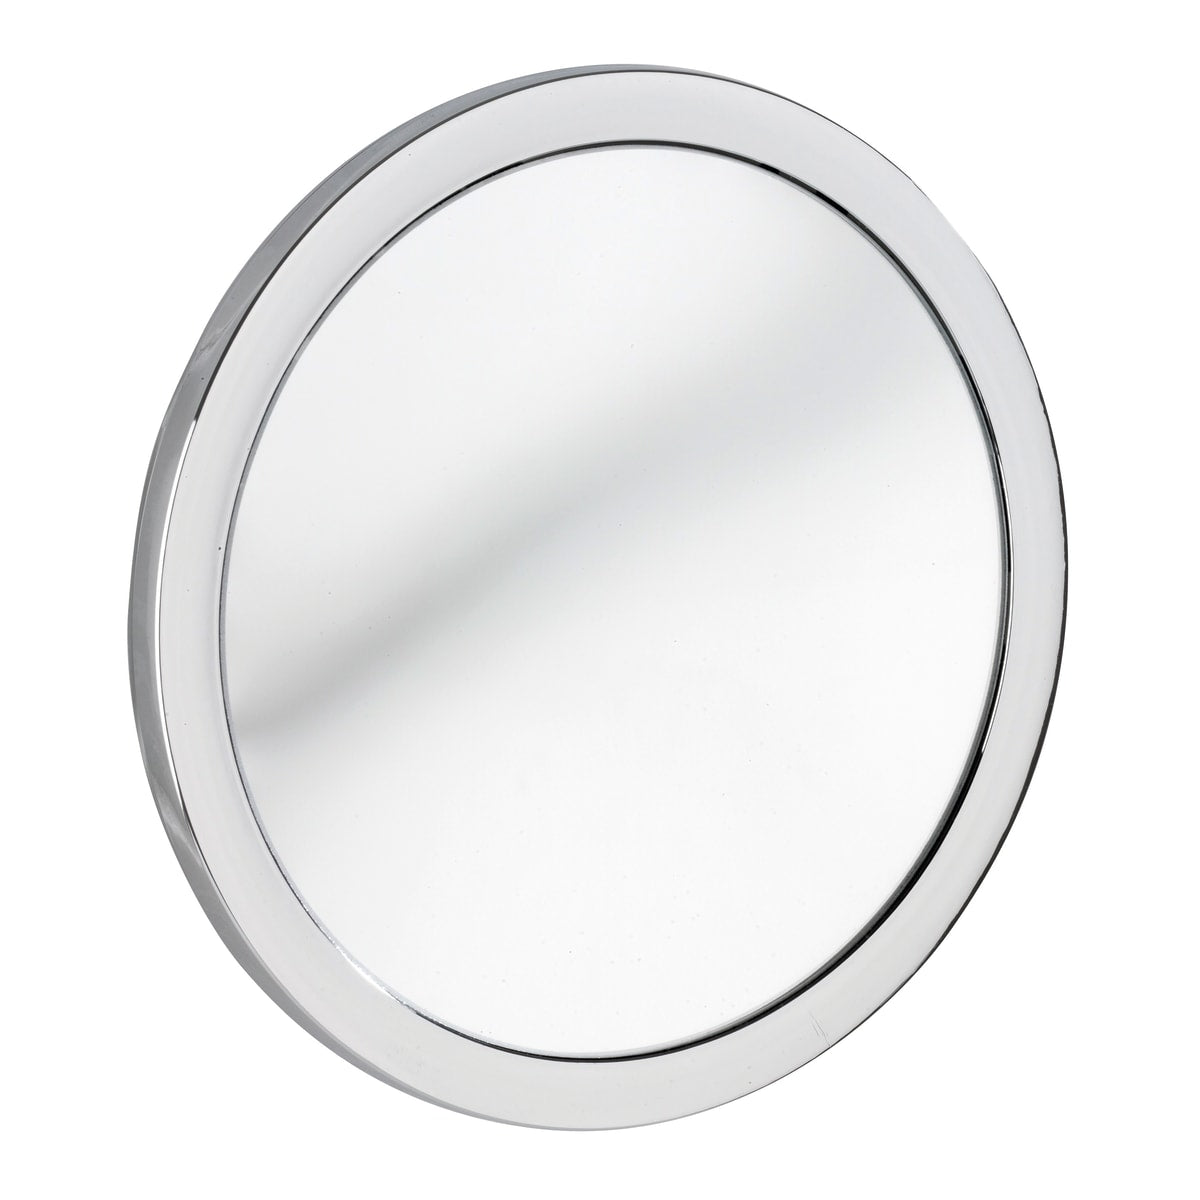 3-FOLD MAGNIFYING MIRROR WITH SUCTION CUP